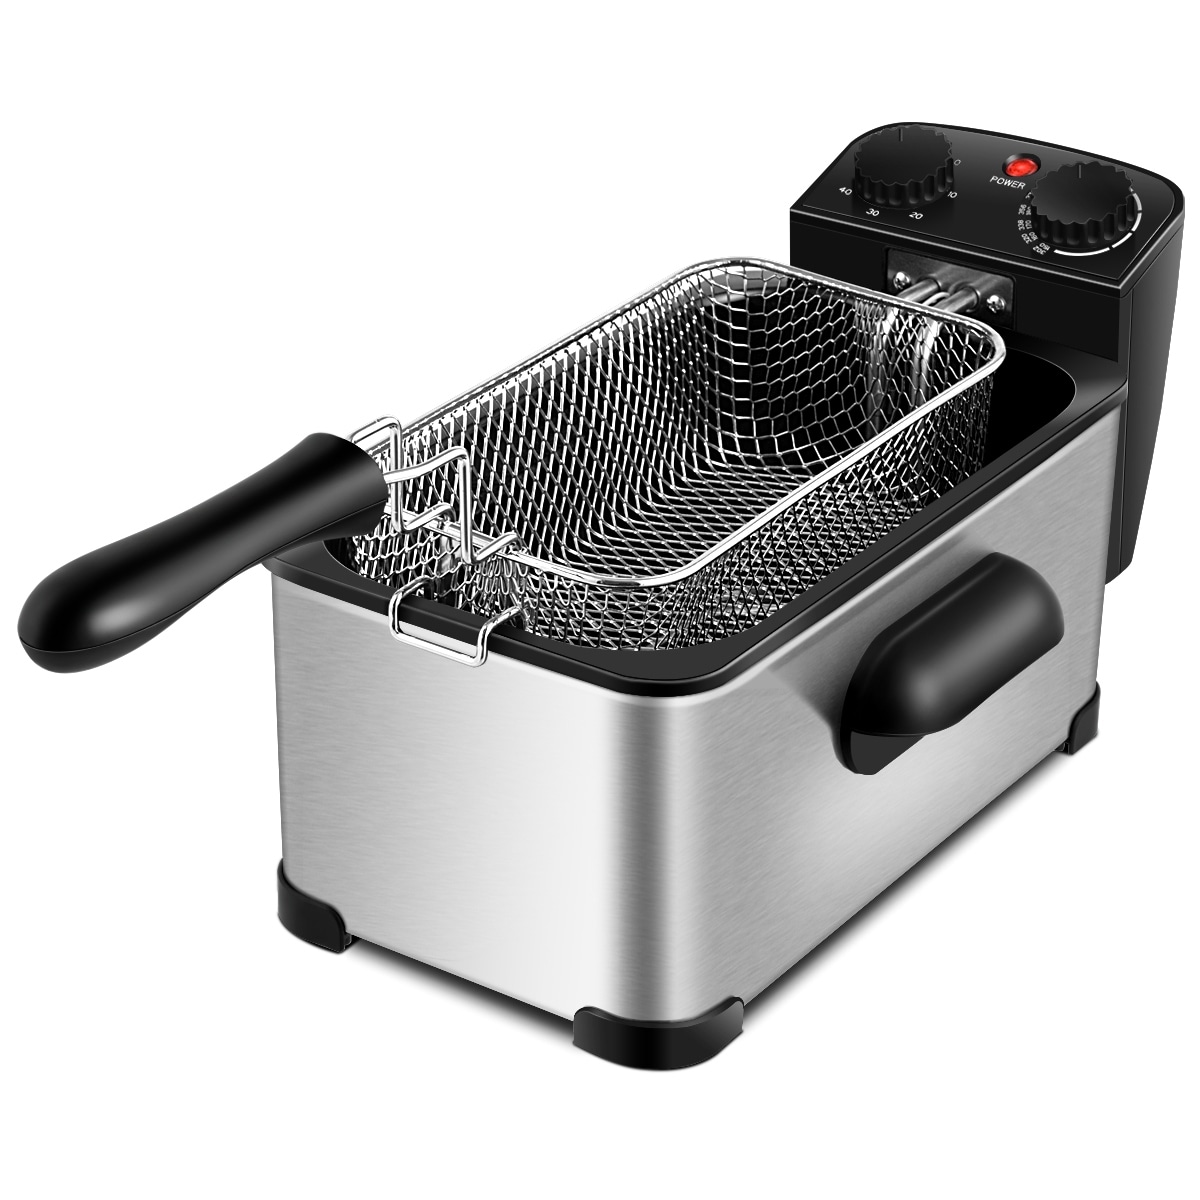 Costway 5.3 Qt Electric Hot Air Fryer 1700w Stainless Steel Non-stick Fry  Basket